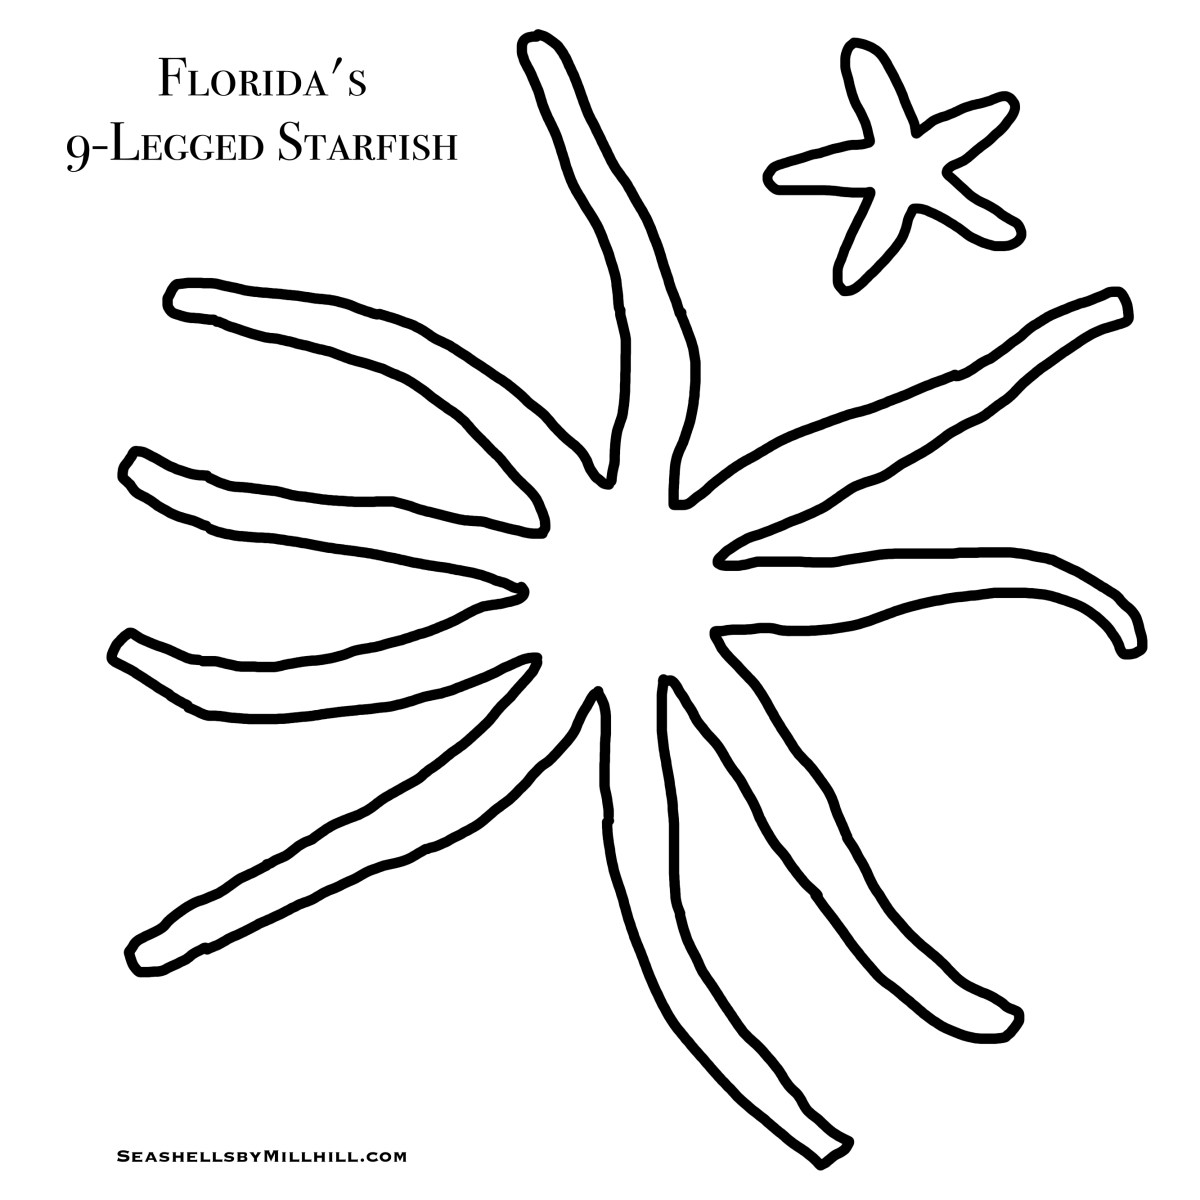 Seashells by millhillstarfish or sea stars coloring page printout